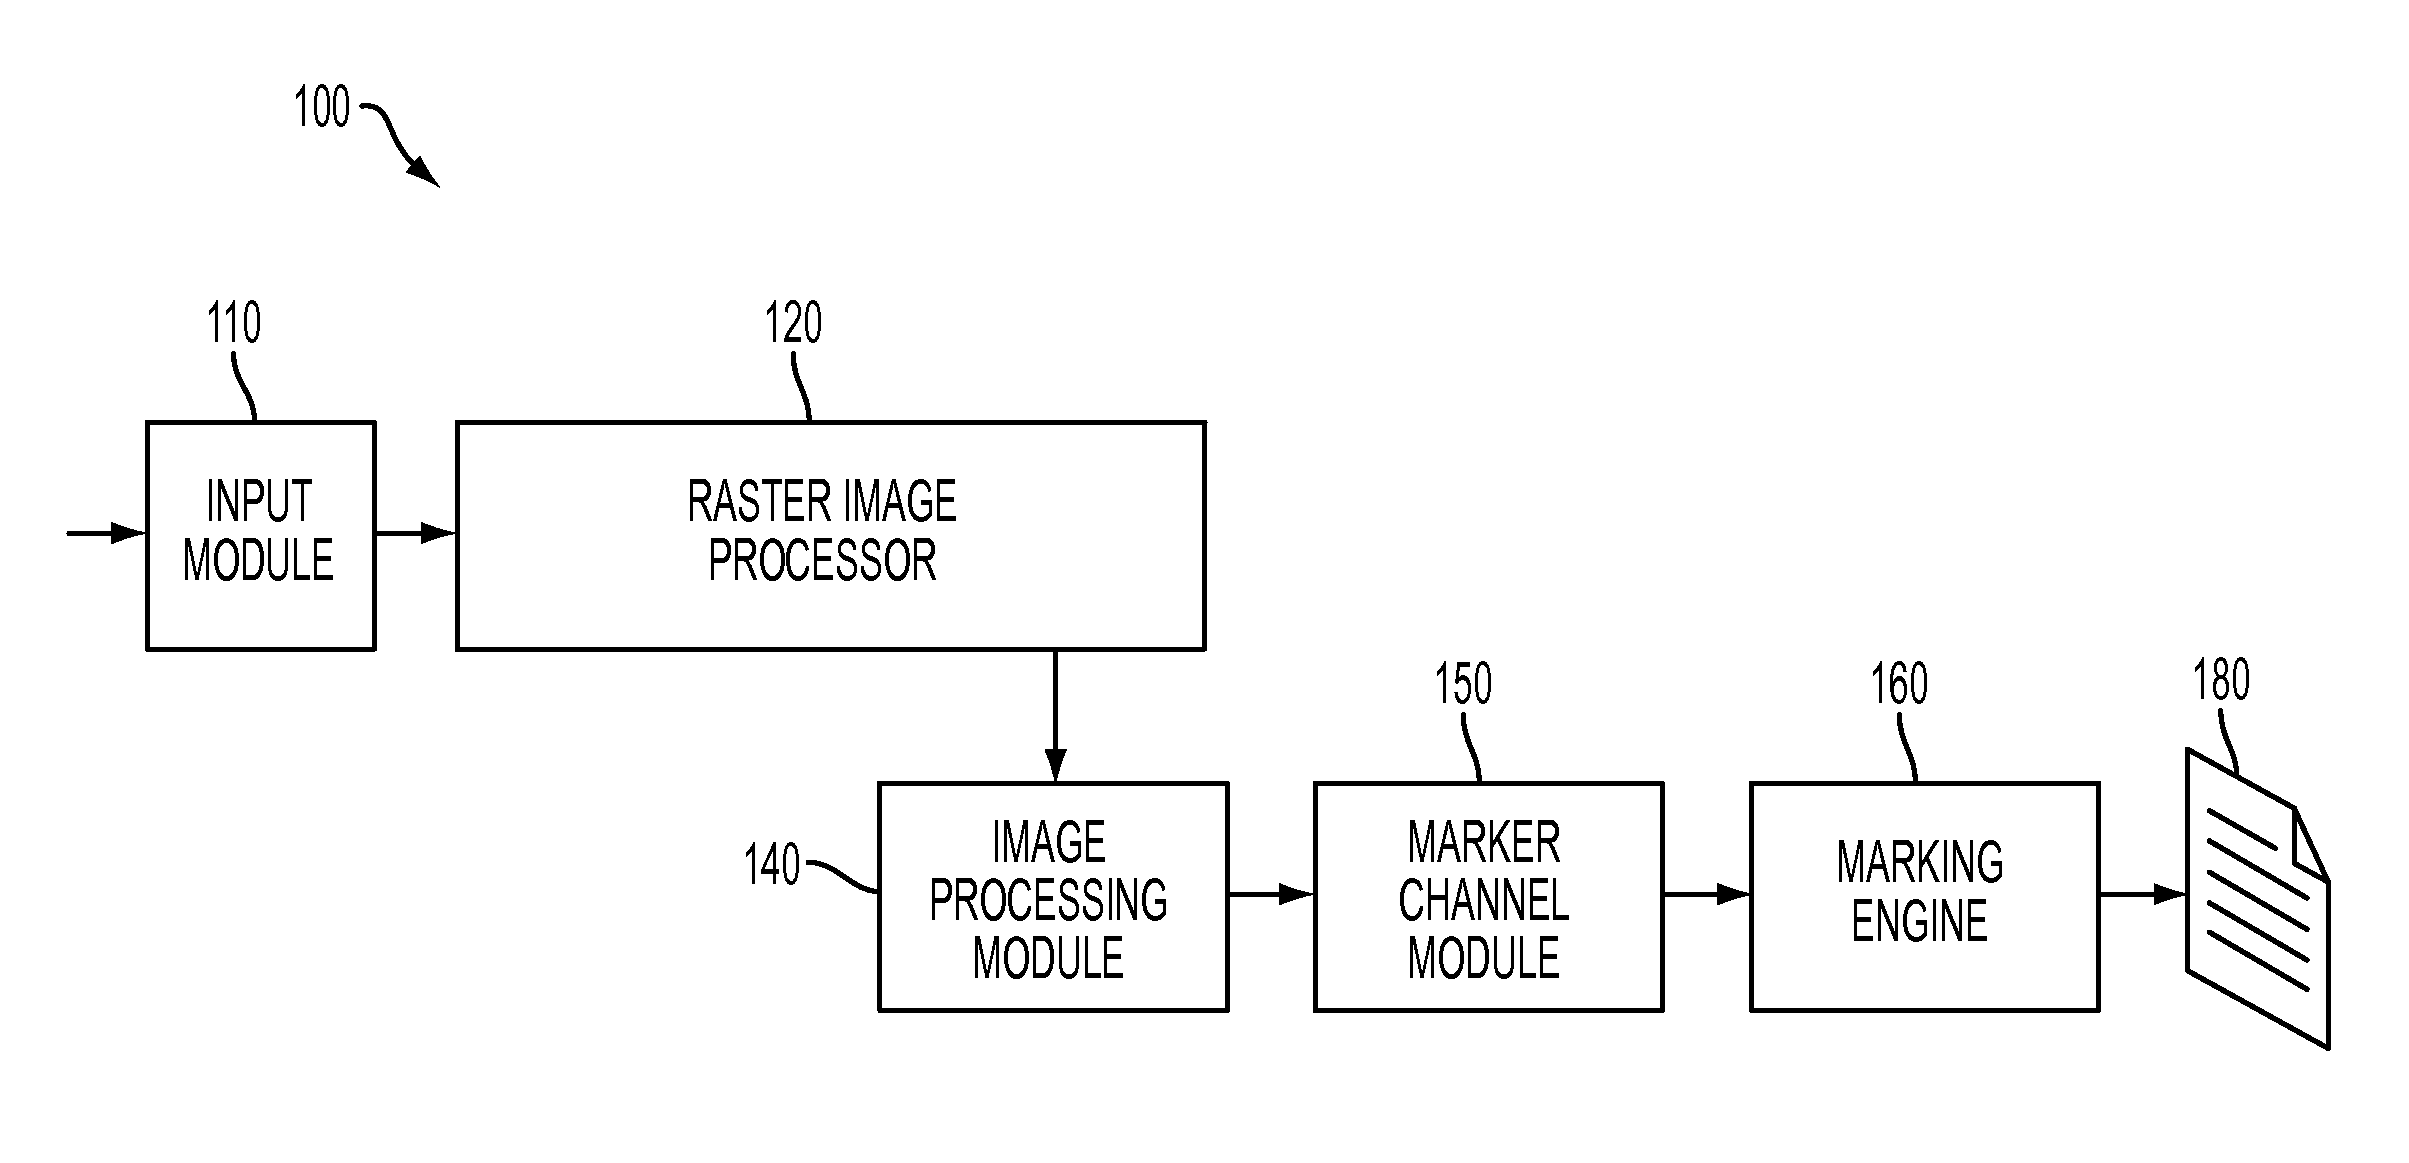 Distributed data flow for page parallel image processing within printing systems